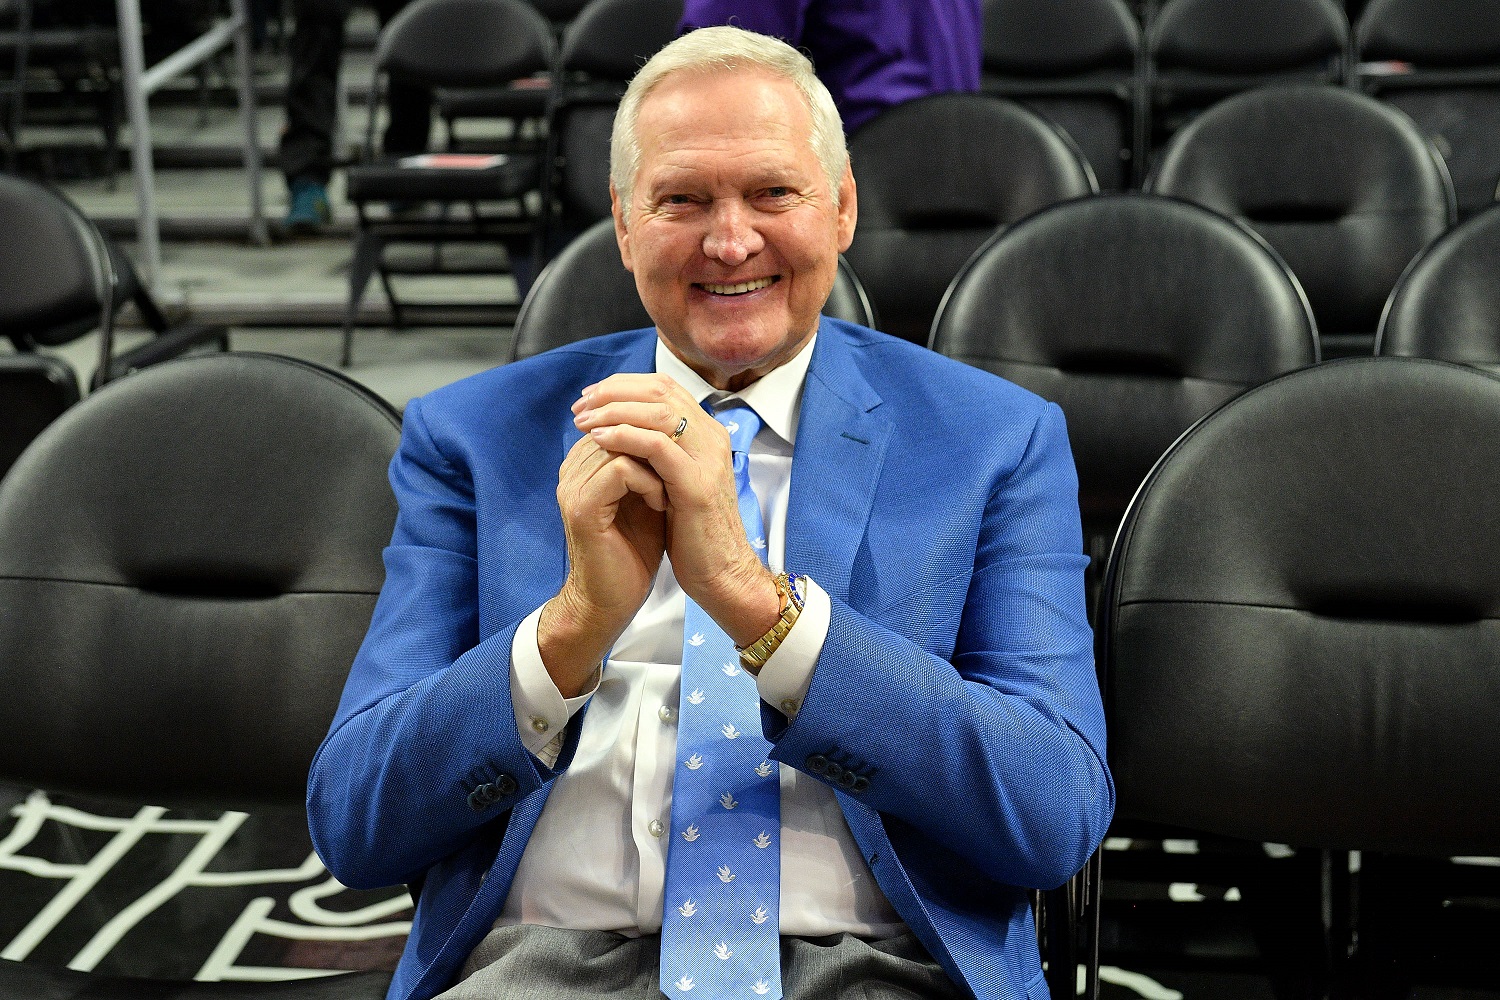 Jerry West attends a basketball game between the Los Angeles Clippers and the Philadelphia 76ers at Staples Center on March 1, 2020.